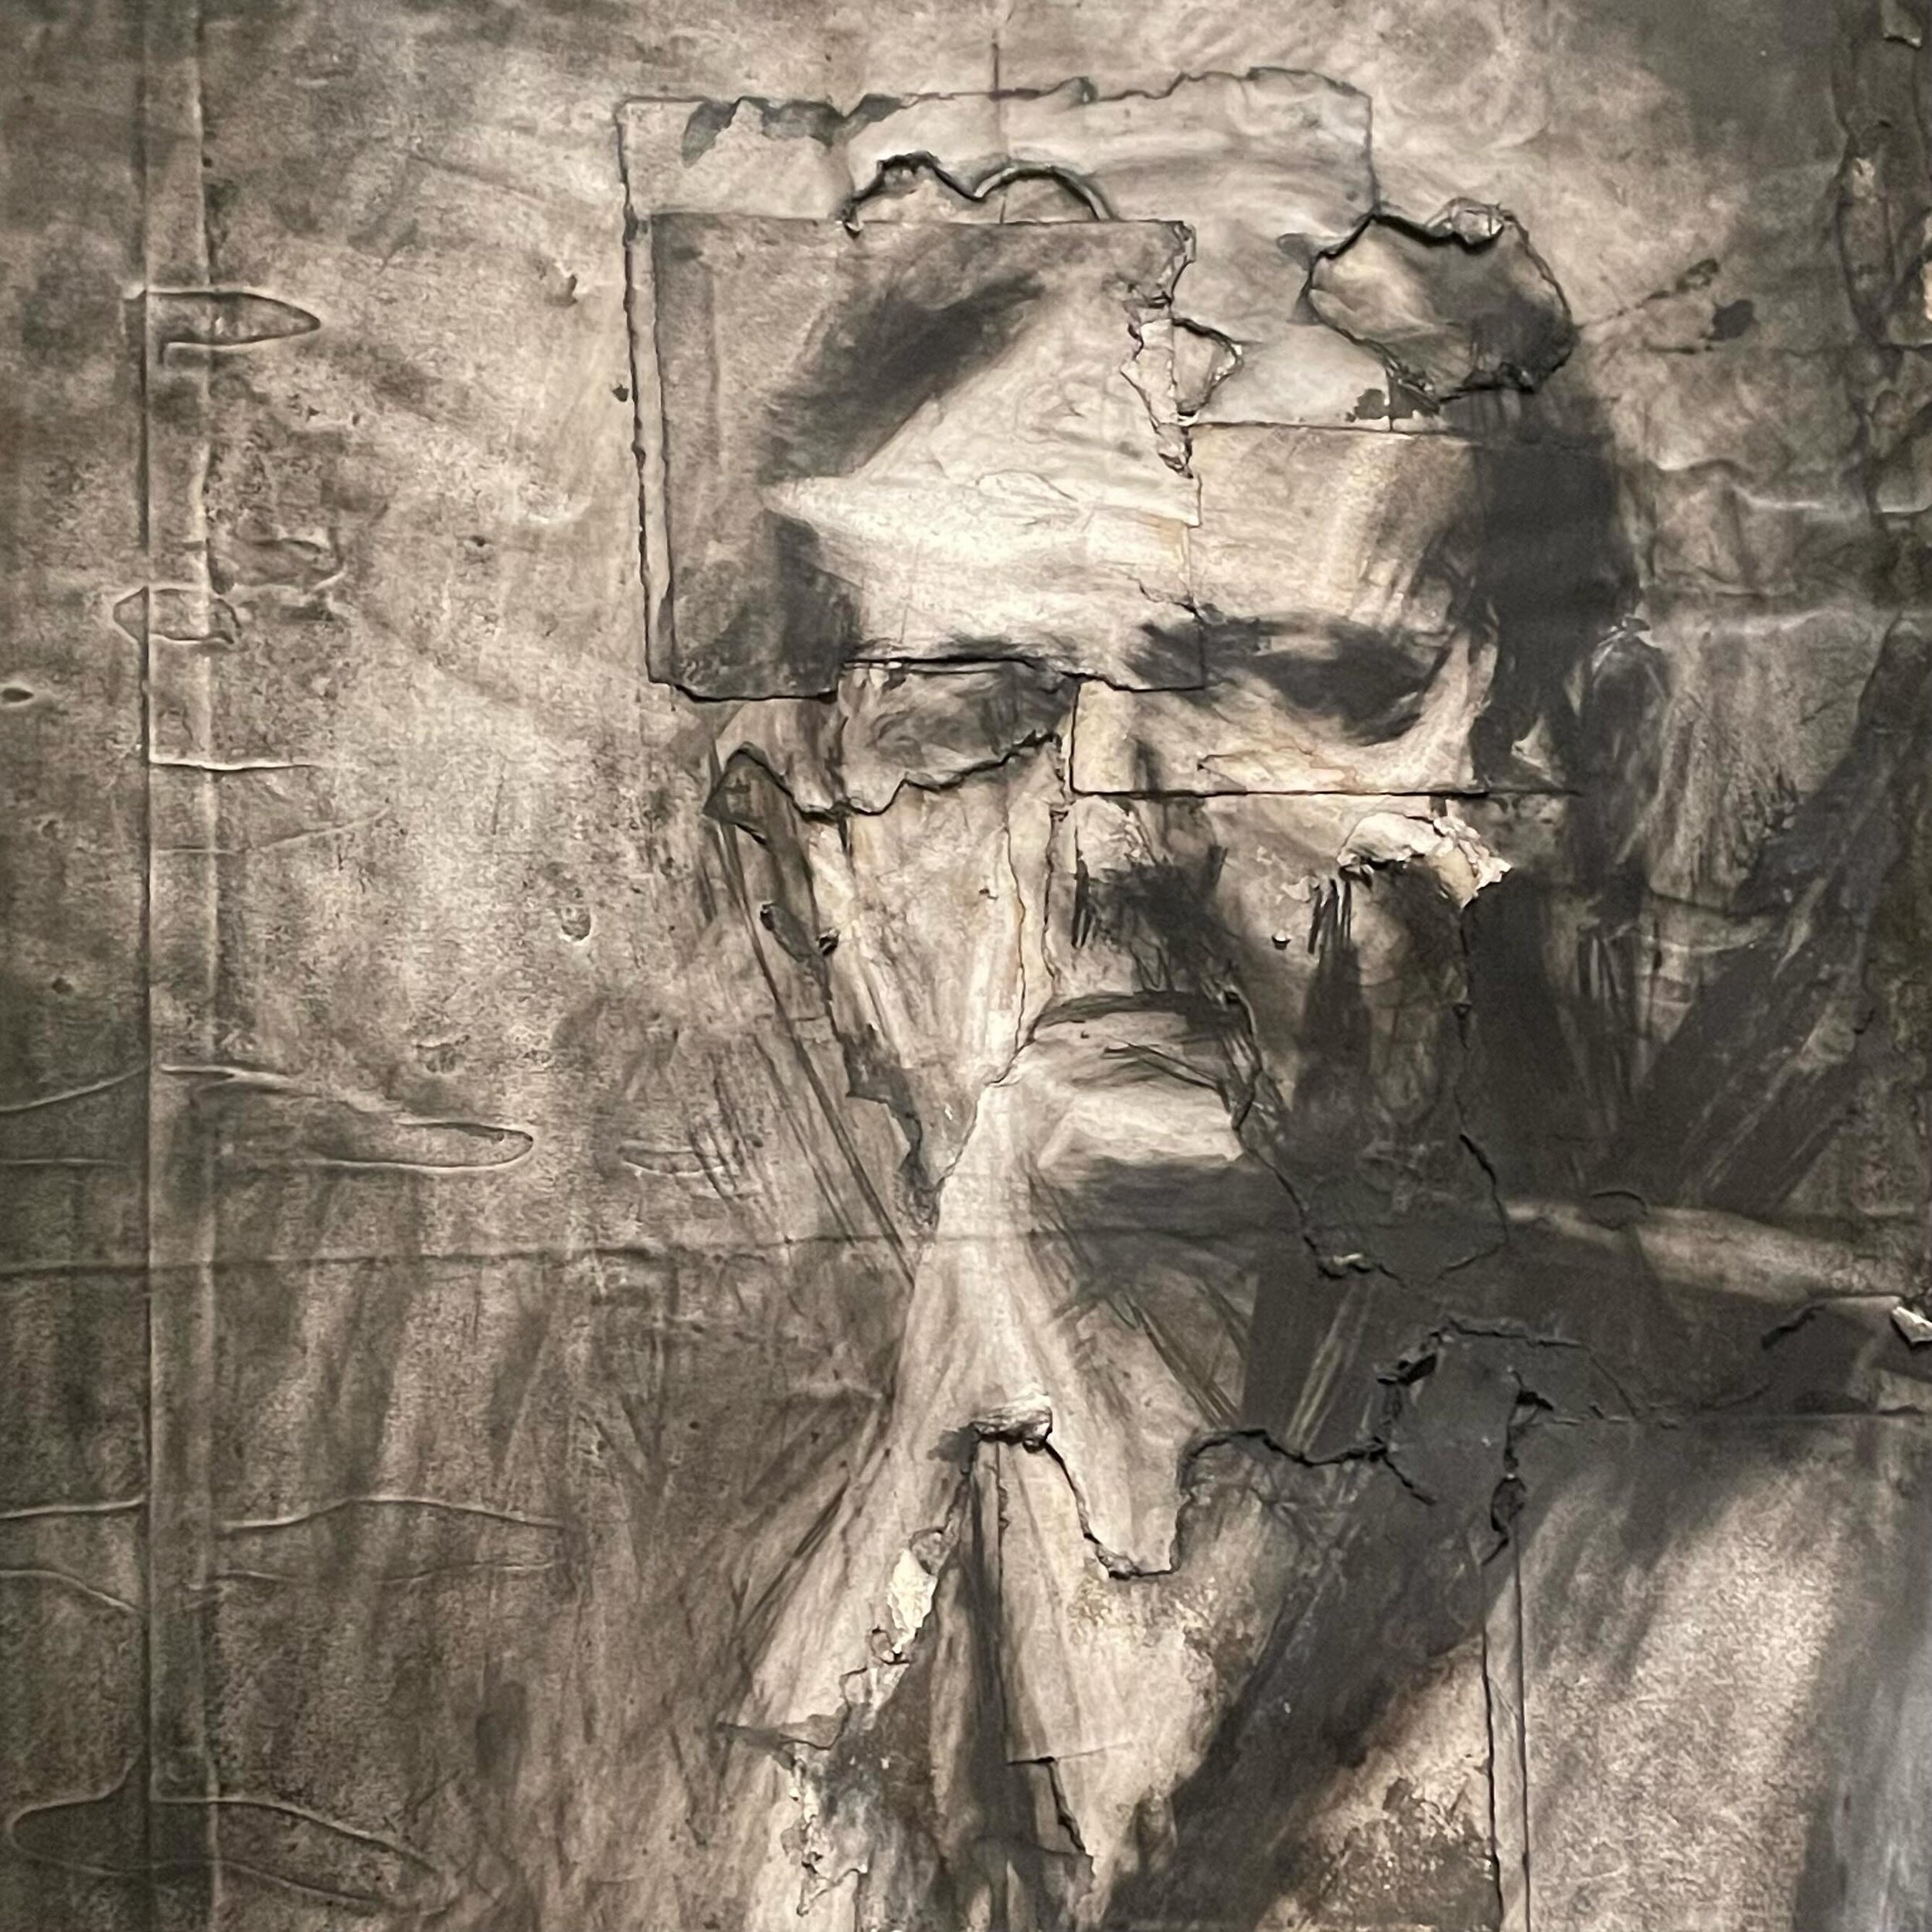 After each sitting with his model, the artist Frank Auerbach would erase almost everything he&rsquo;d drawn, leaving only a blurred, ghostly presence on the paper. He&rsquo;d repeat this process of creation and destruction some forty or fifty times, 